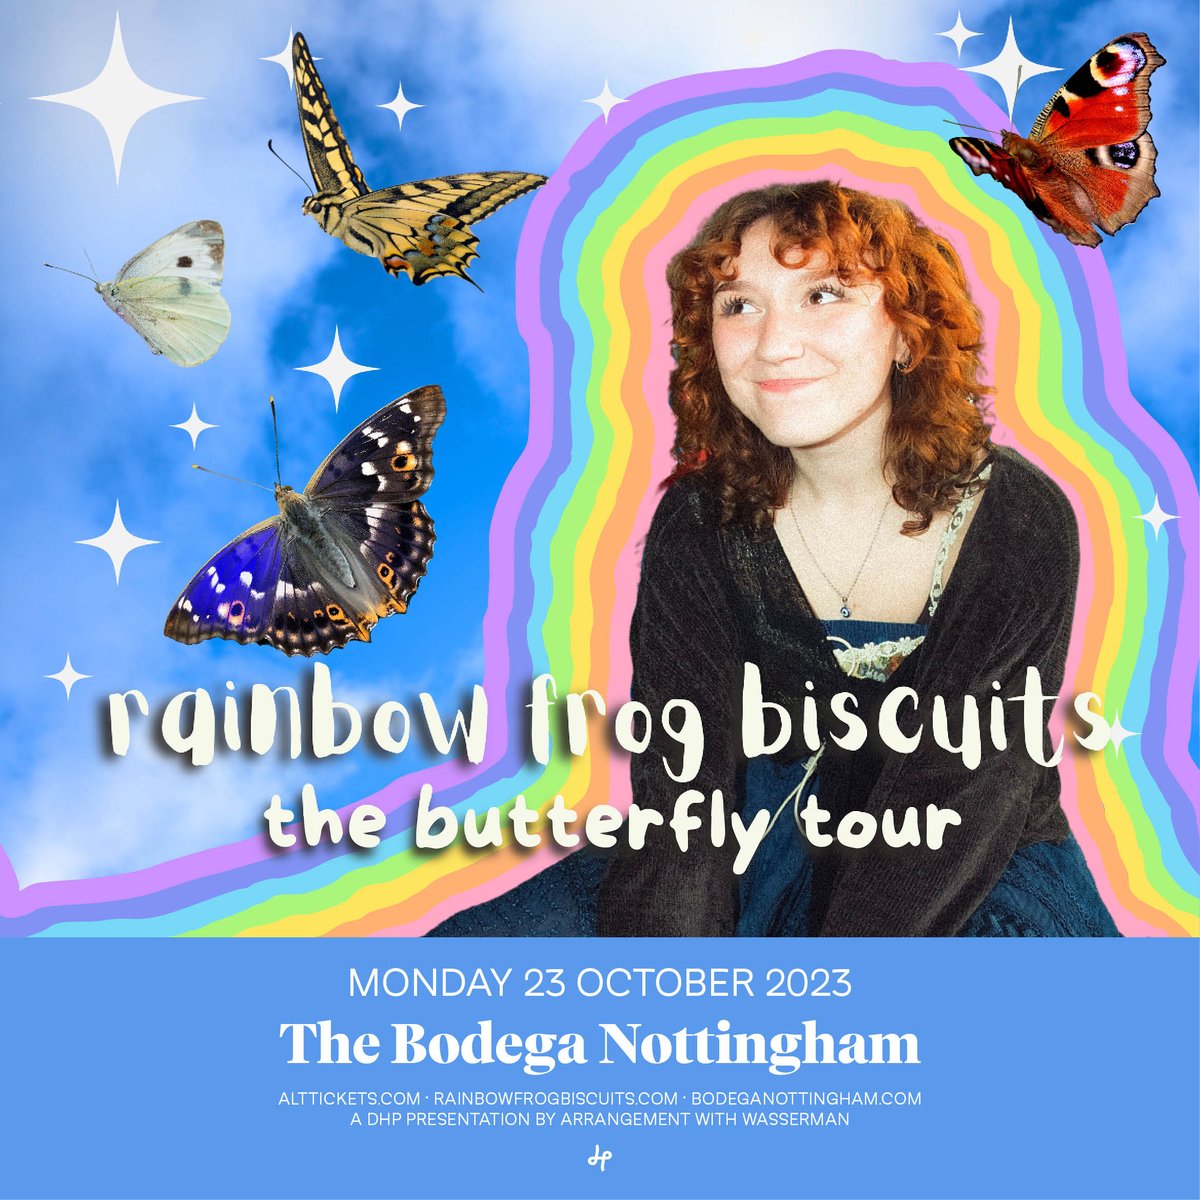 NEW/ Turning her detailed observations of everyday life into relatable folk-influenced pop, @rainbowfrogbics plays @bodeganotts on 23rd October! Tickets go on sale this Thursday at 10am, set a reminder: bit.ly/3PR1D3D